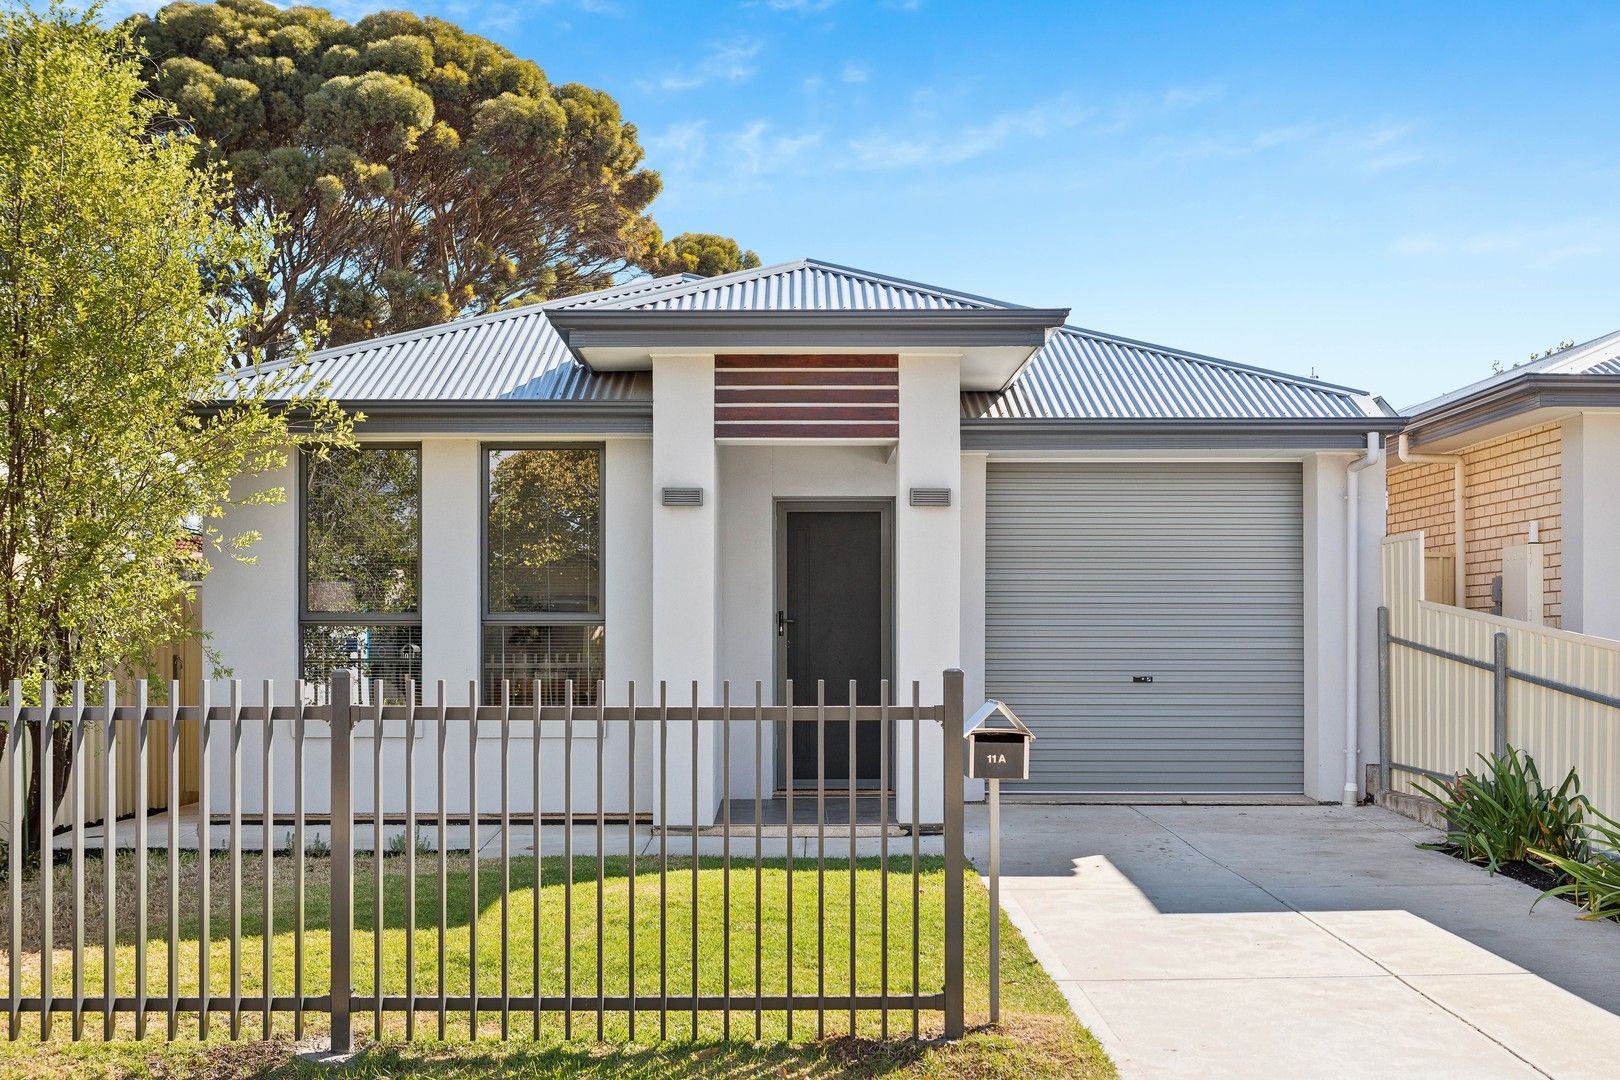 11A Mercedes Drive, Holden Hill SA 5088, Image 1